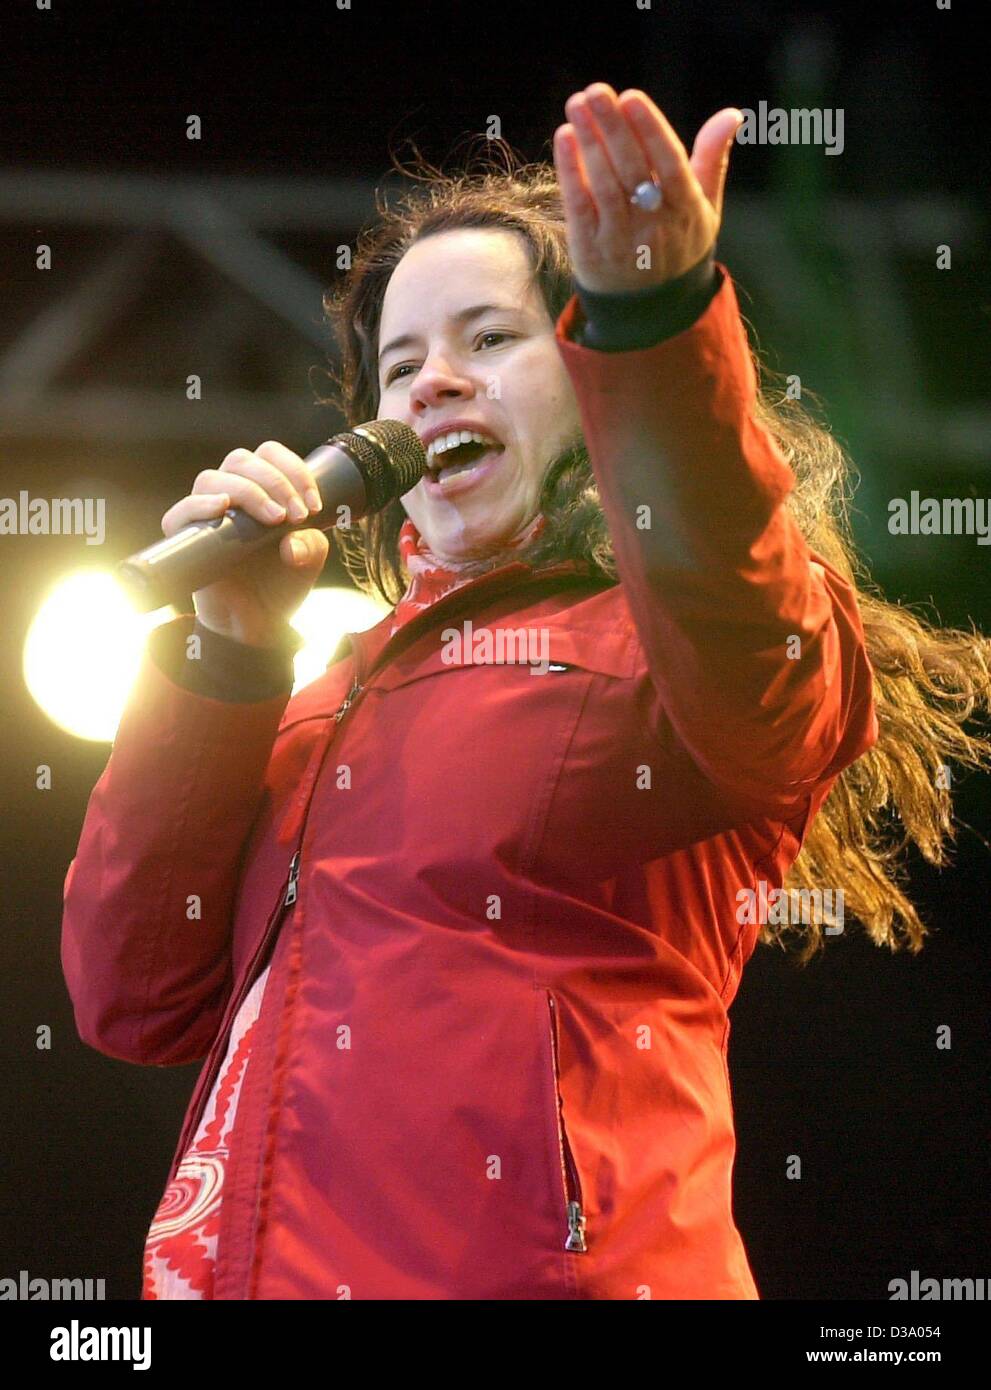 (dpa) - US folk and rock musician Natalie Merchant performs at the German open air festival 'Rock am Ring' on the Nuerburgring, 18 May 2002. About 40000 people came to attend the two-day concert featuring artists of rock, pop and alternative music. Stock Photo